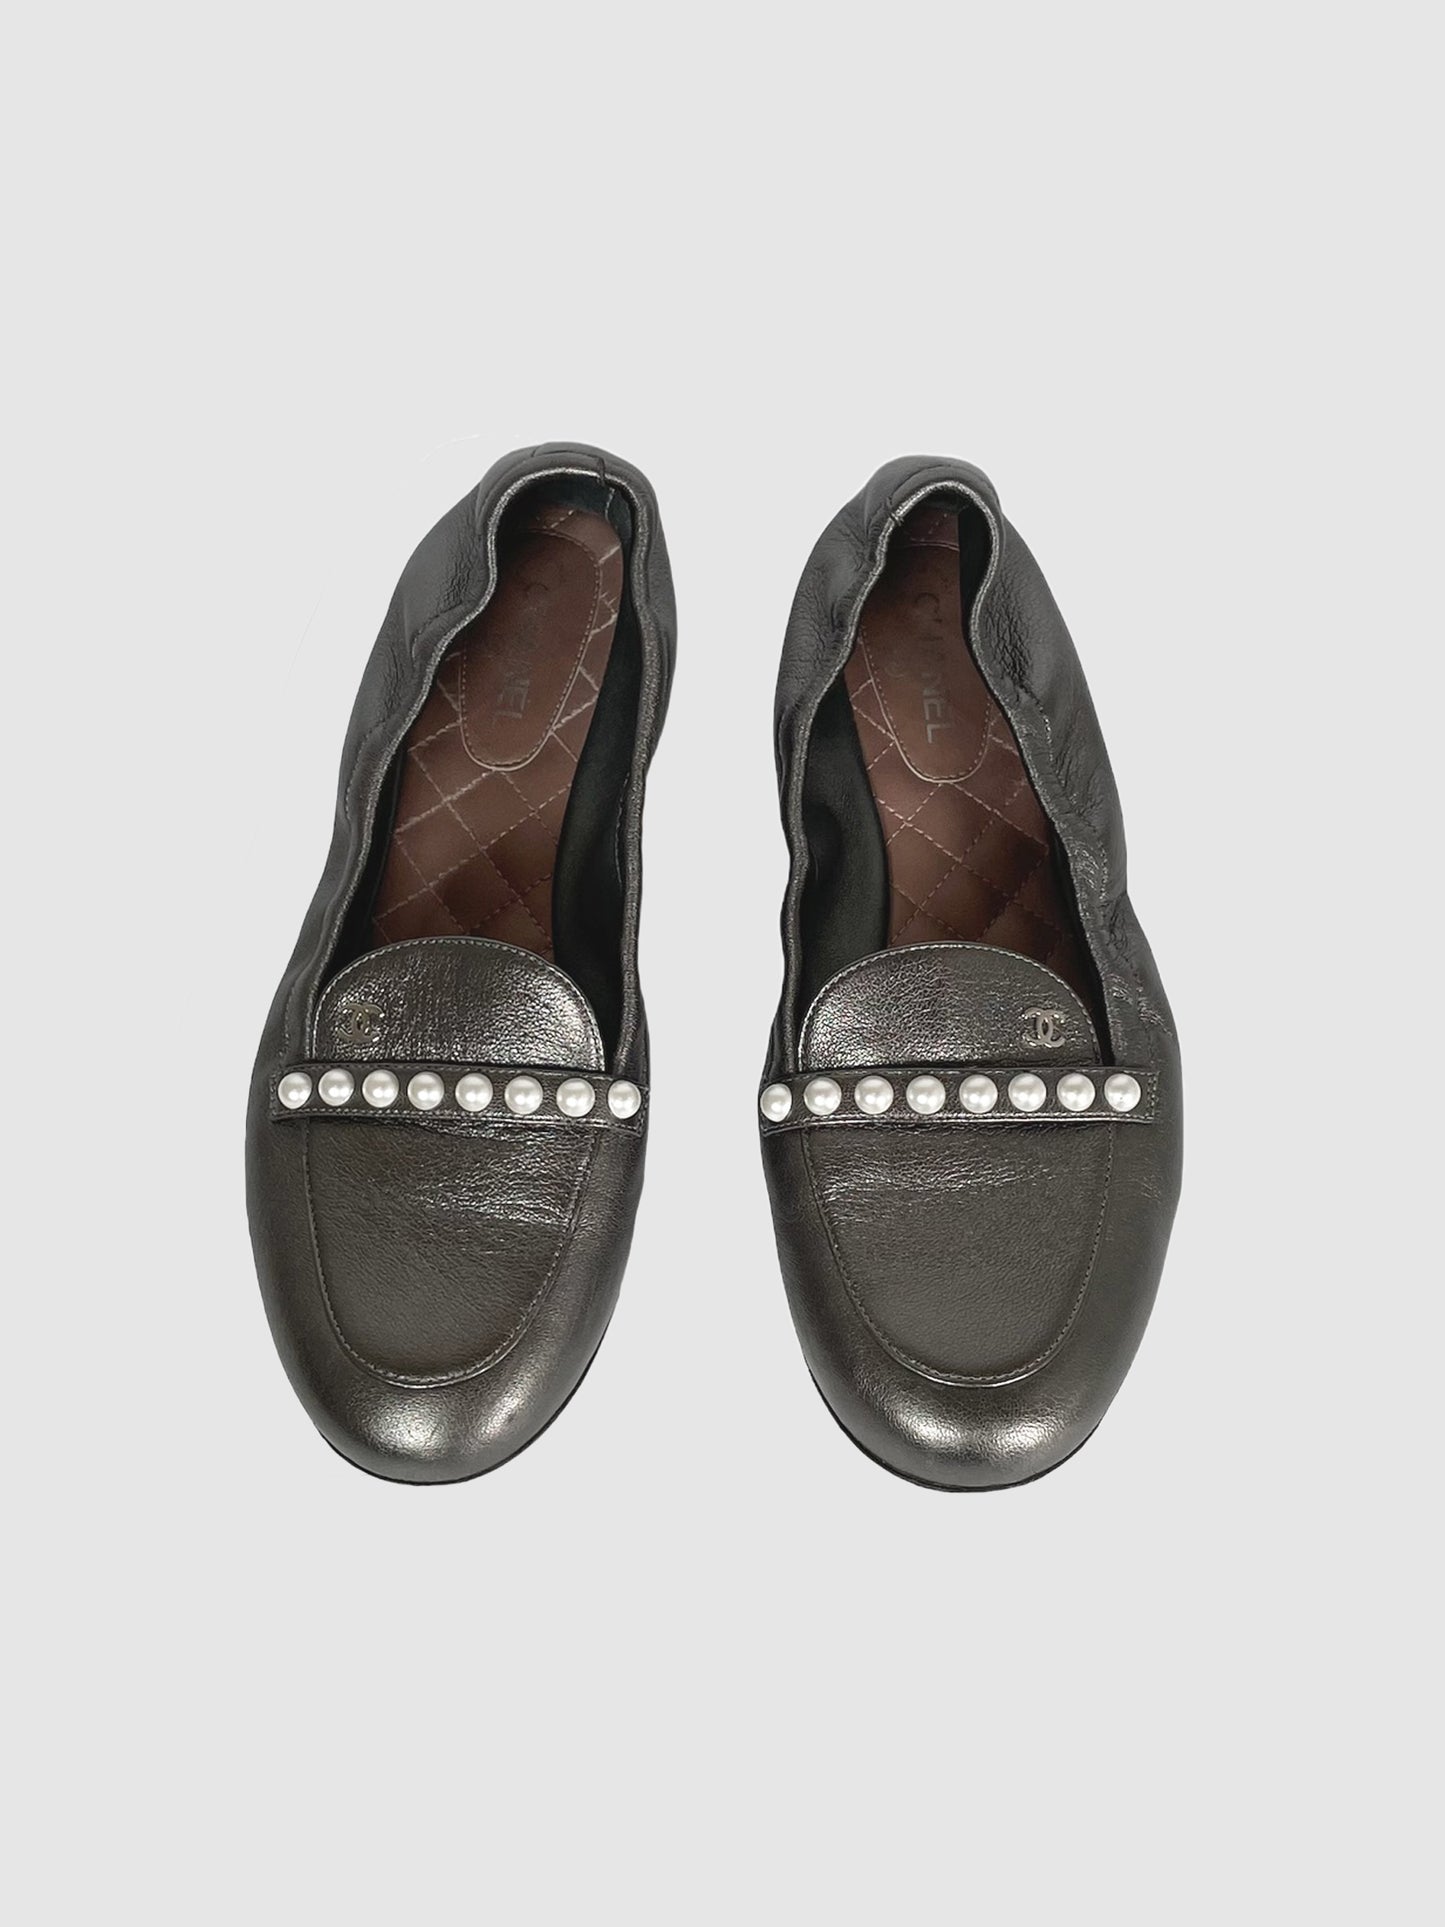 Chanel Scrunchie Loafers with Pearl - Size 38